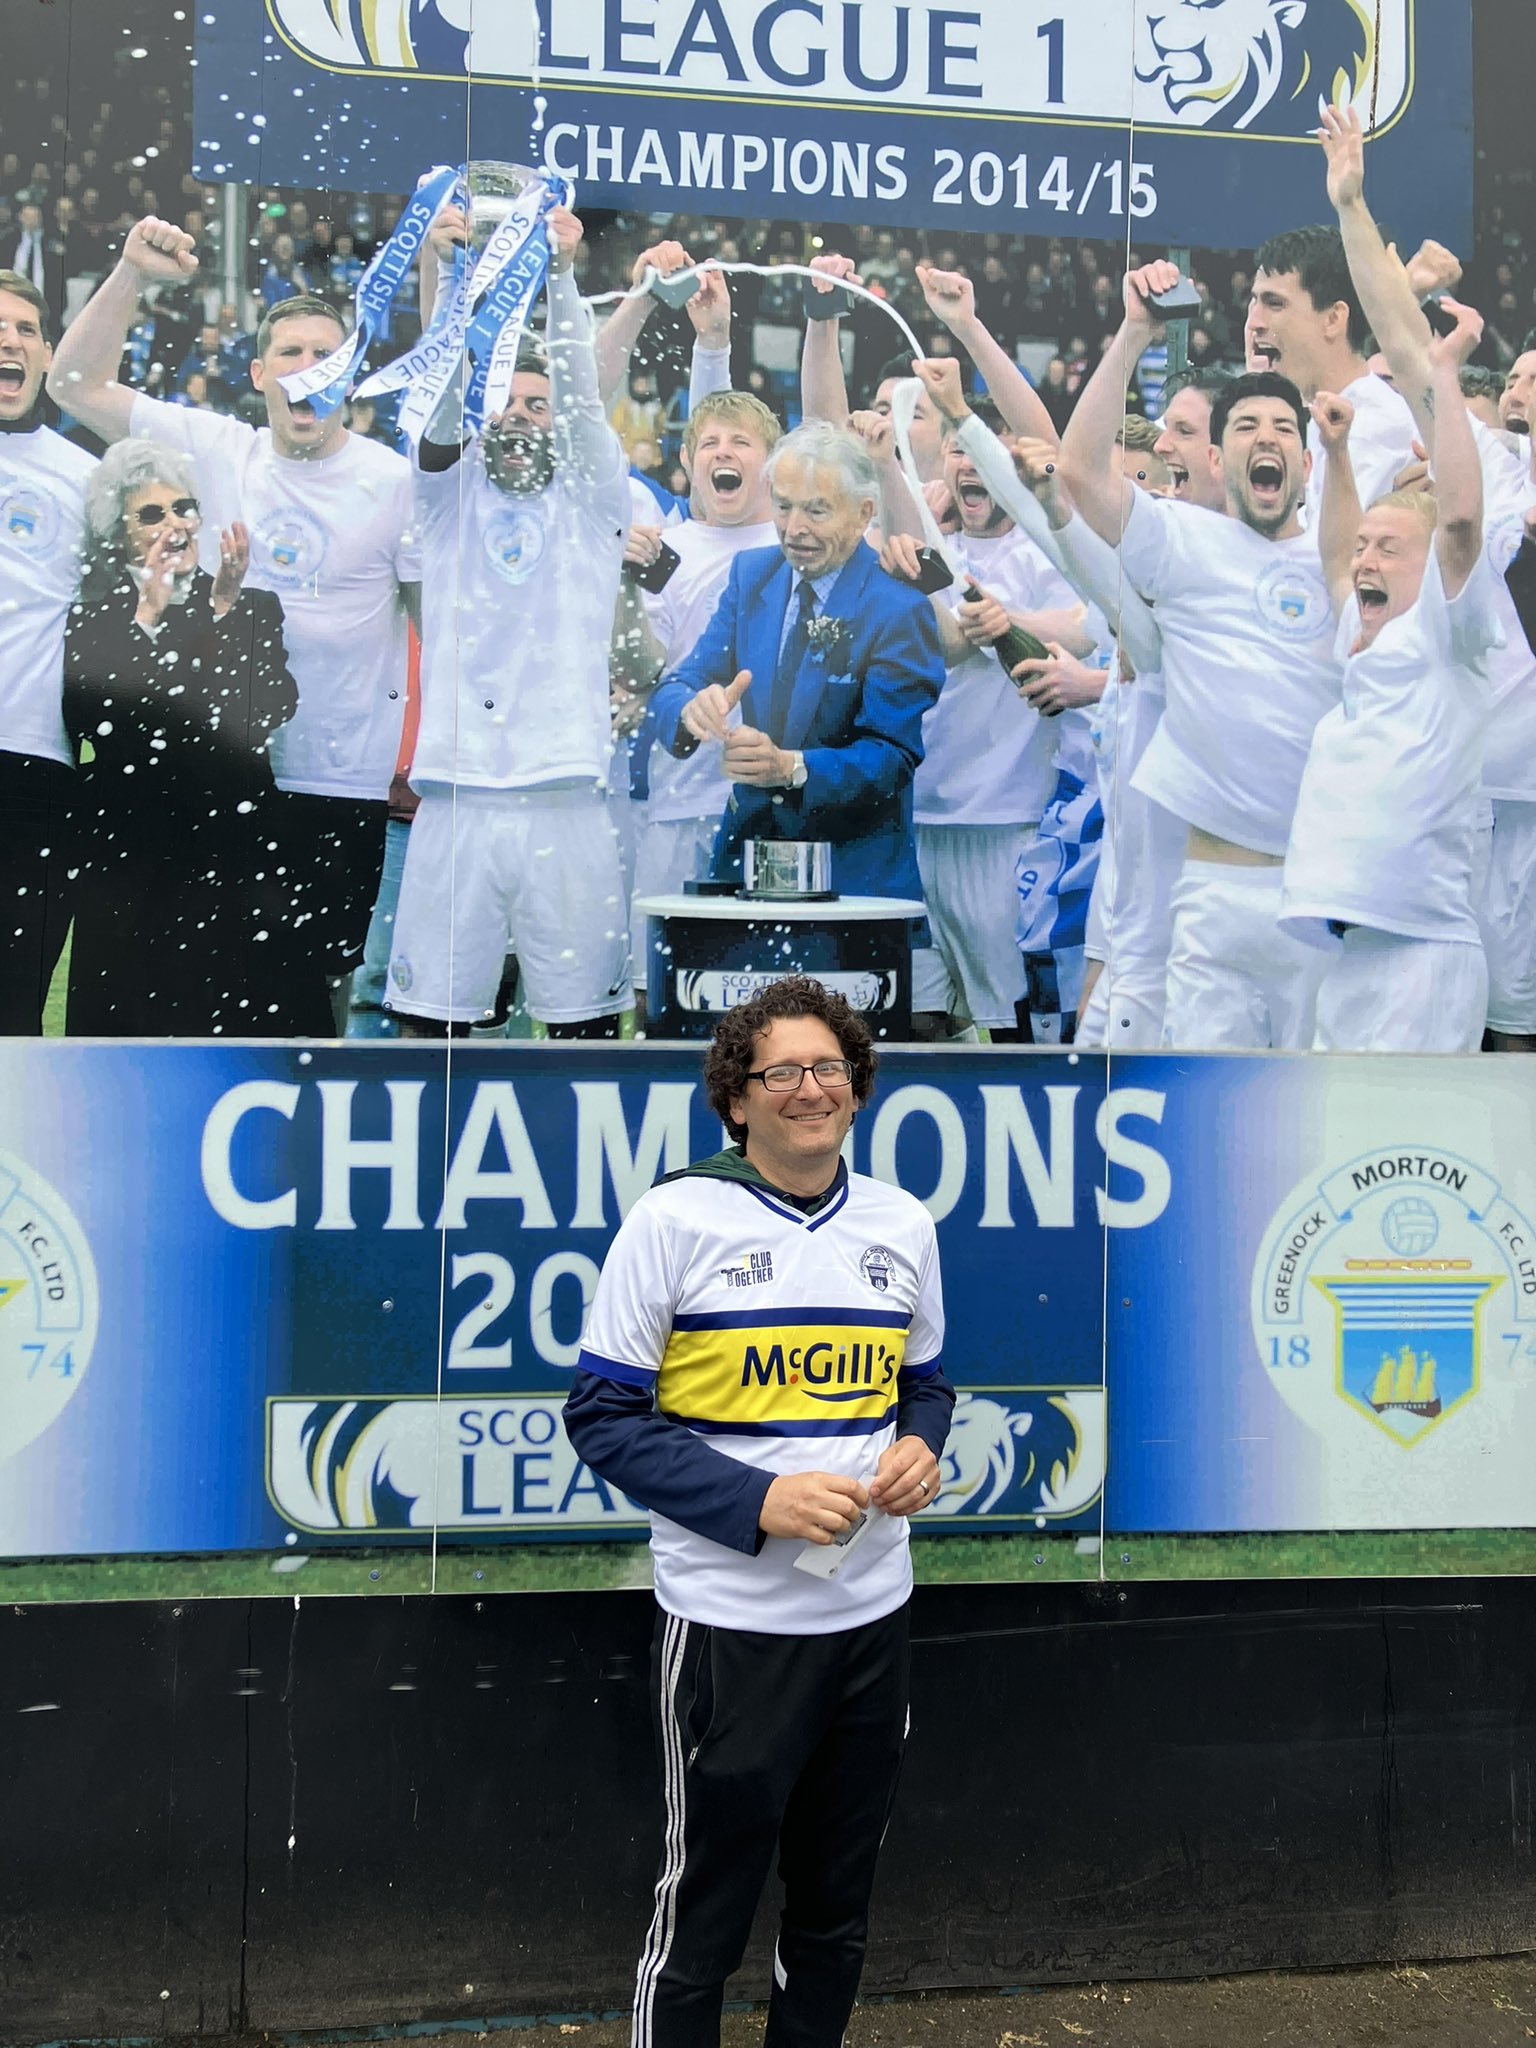 Fan travels 5,000 miles to watch his beloved Morton